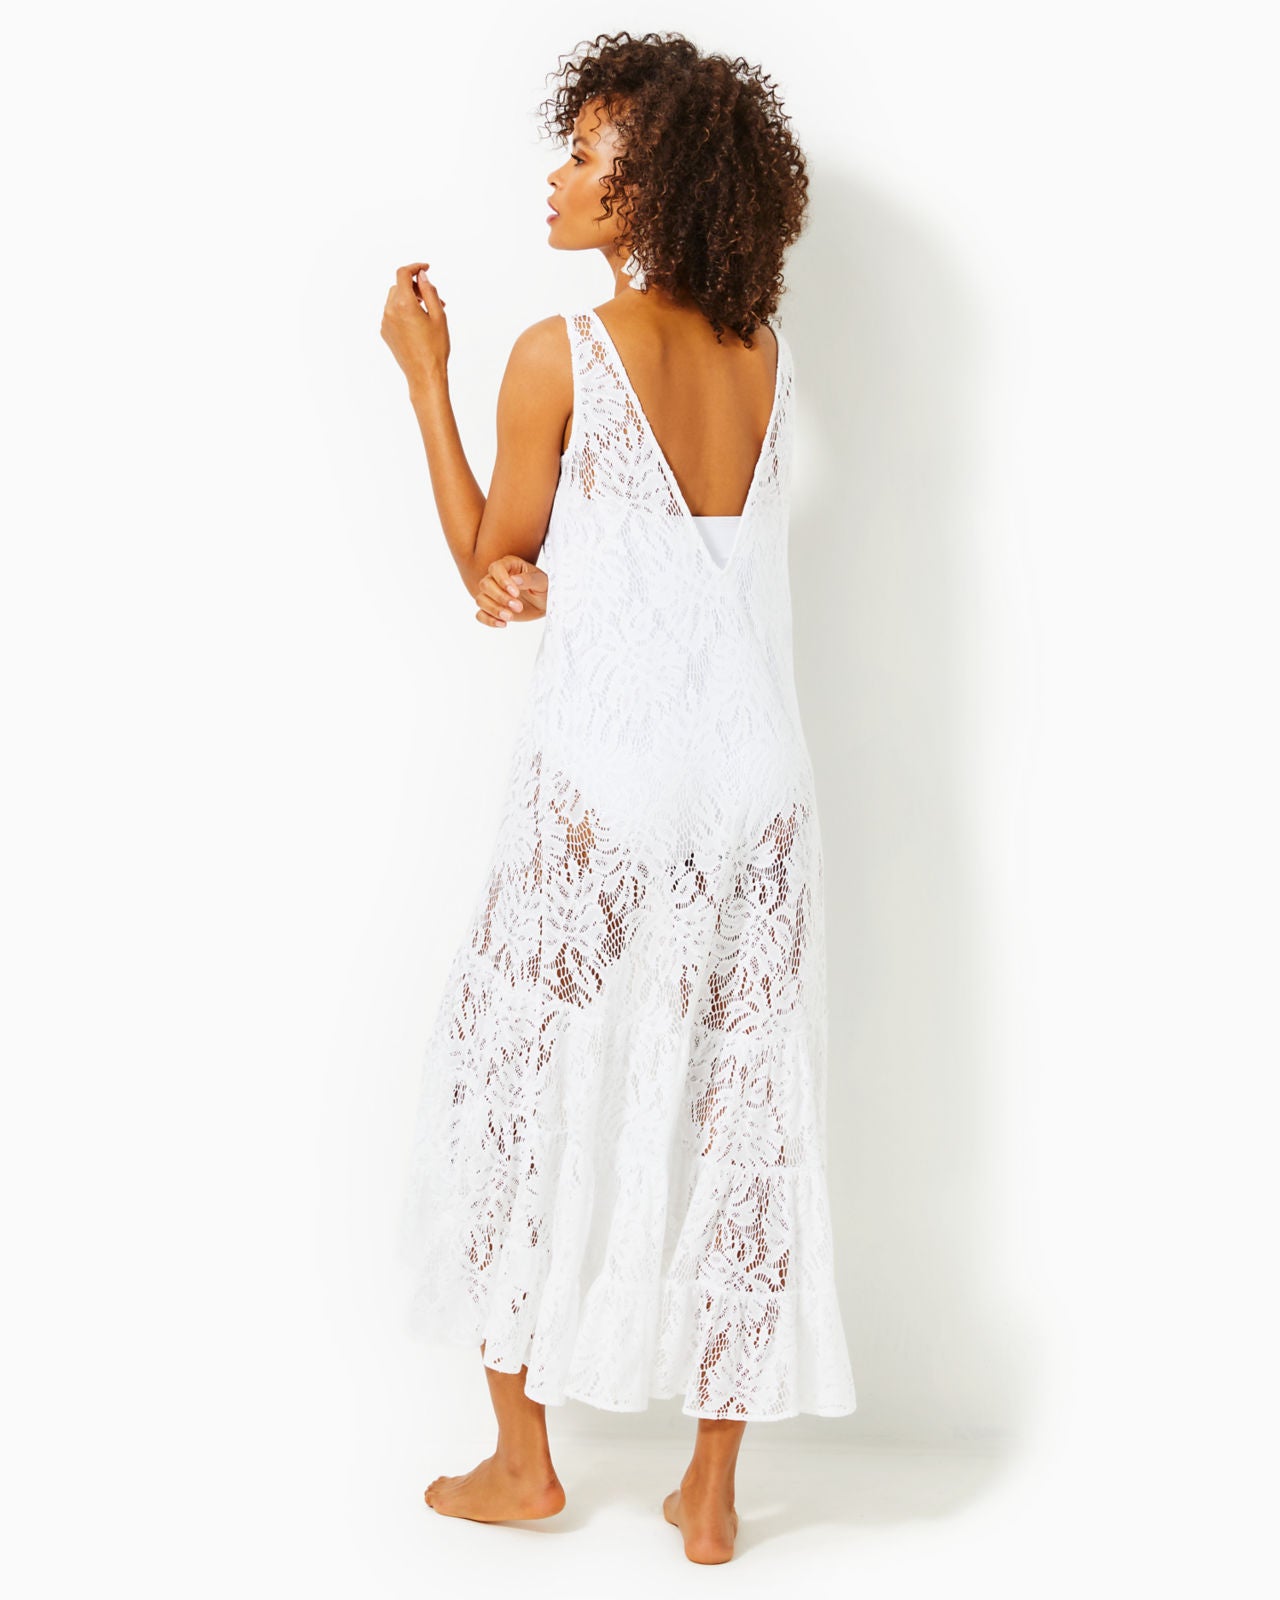 Finnley Lace Coverup